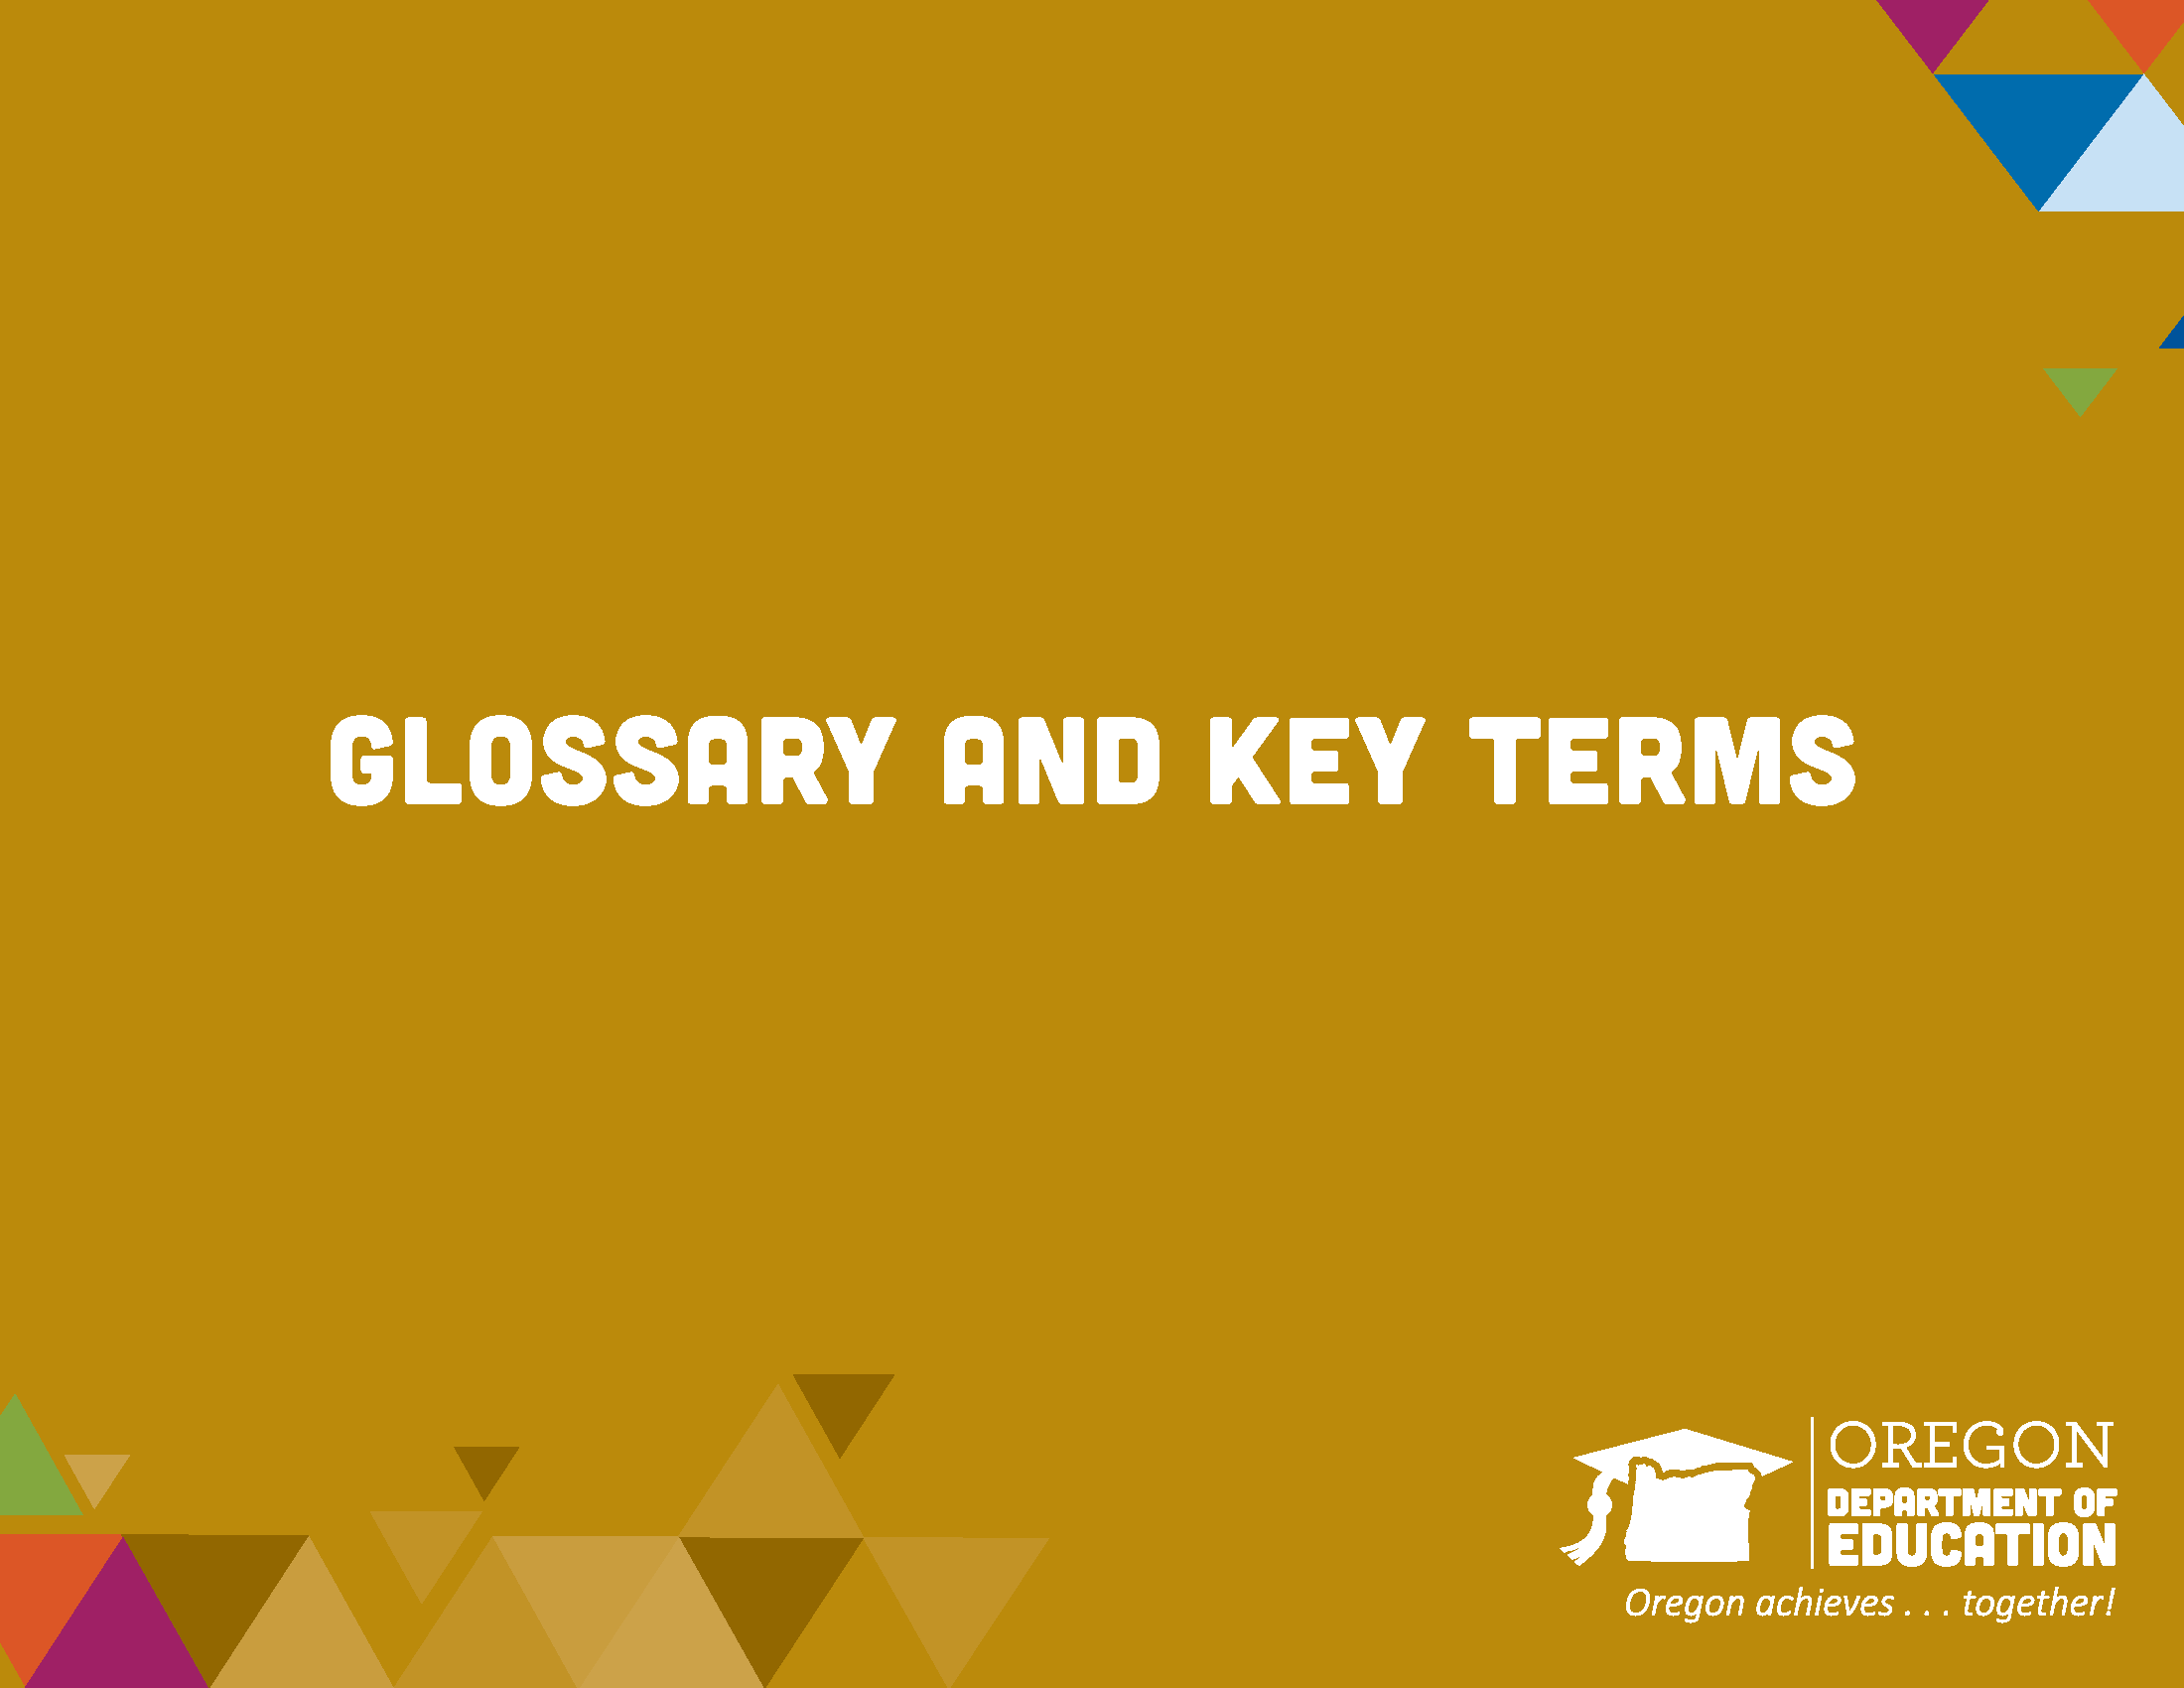 Glossary and key terms